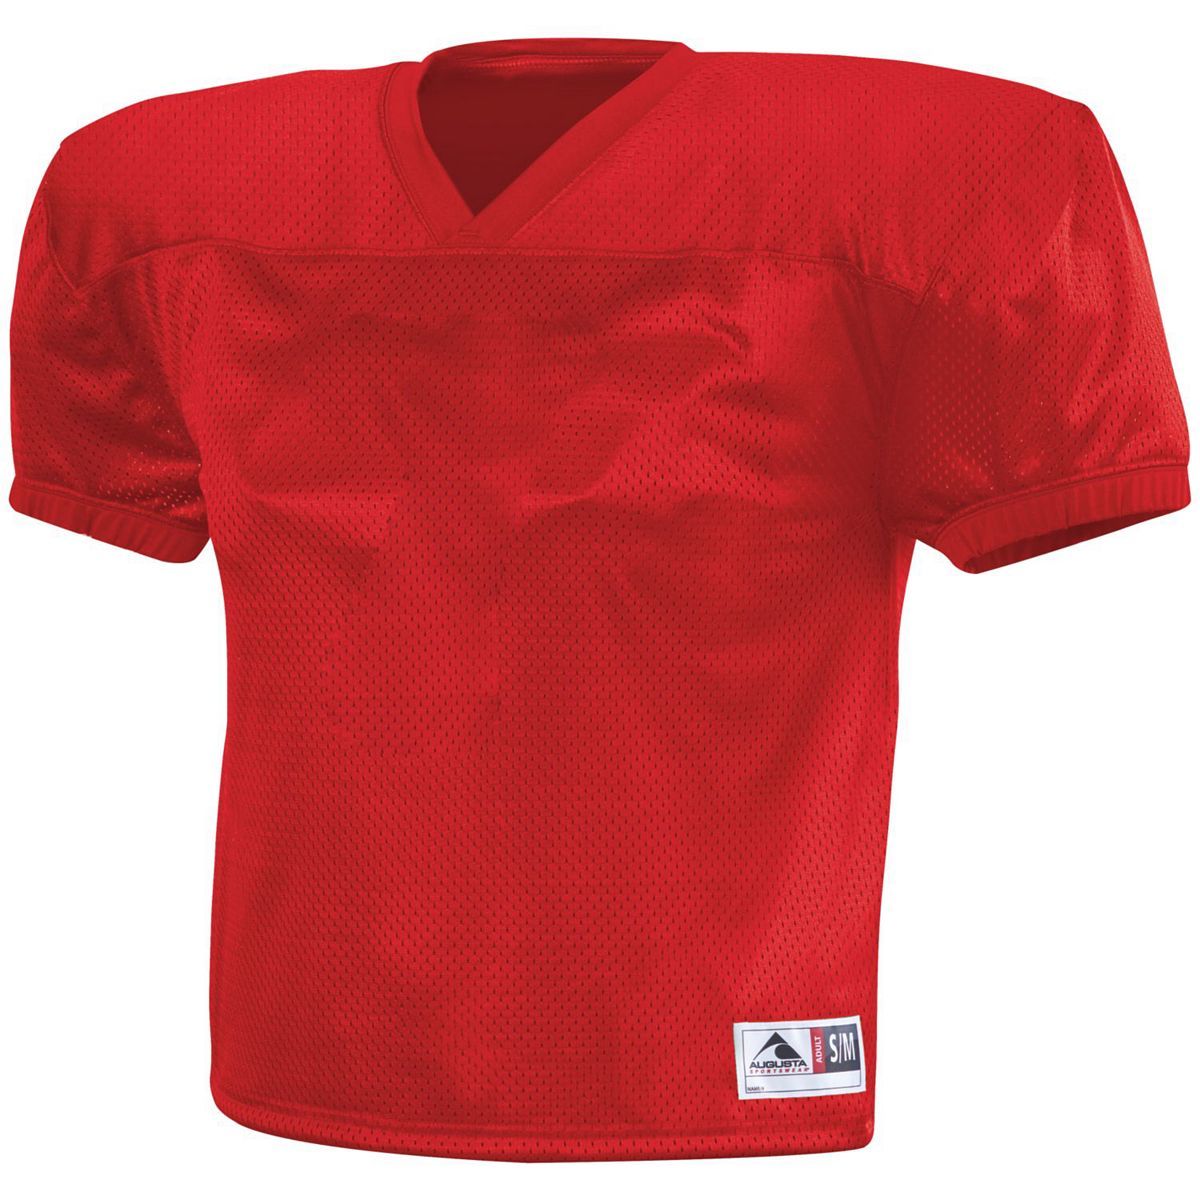 Augusta Sportswear Dash Practice Jersey in Red  -Part of the Adult, Adult-Jersey, Augusta-Products, Football, Shirts, All-Sports, All-Sports-1 product lines at KanaleyCreations.com